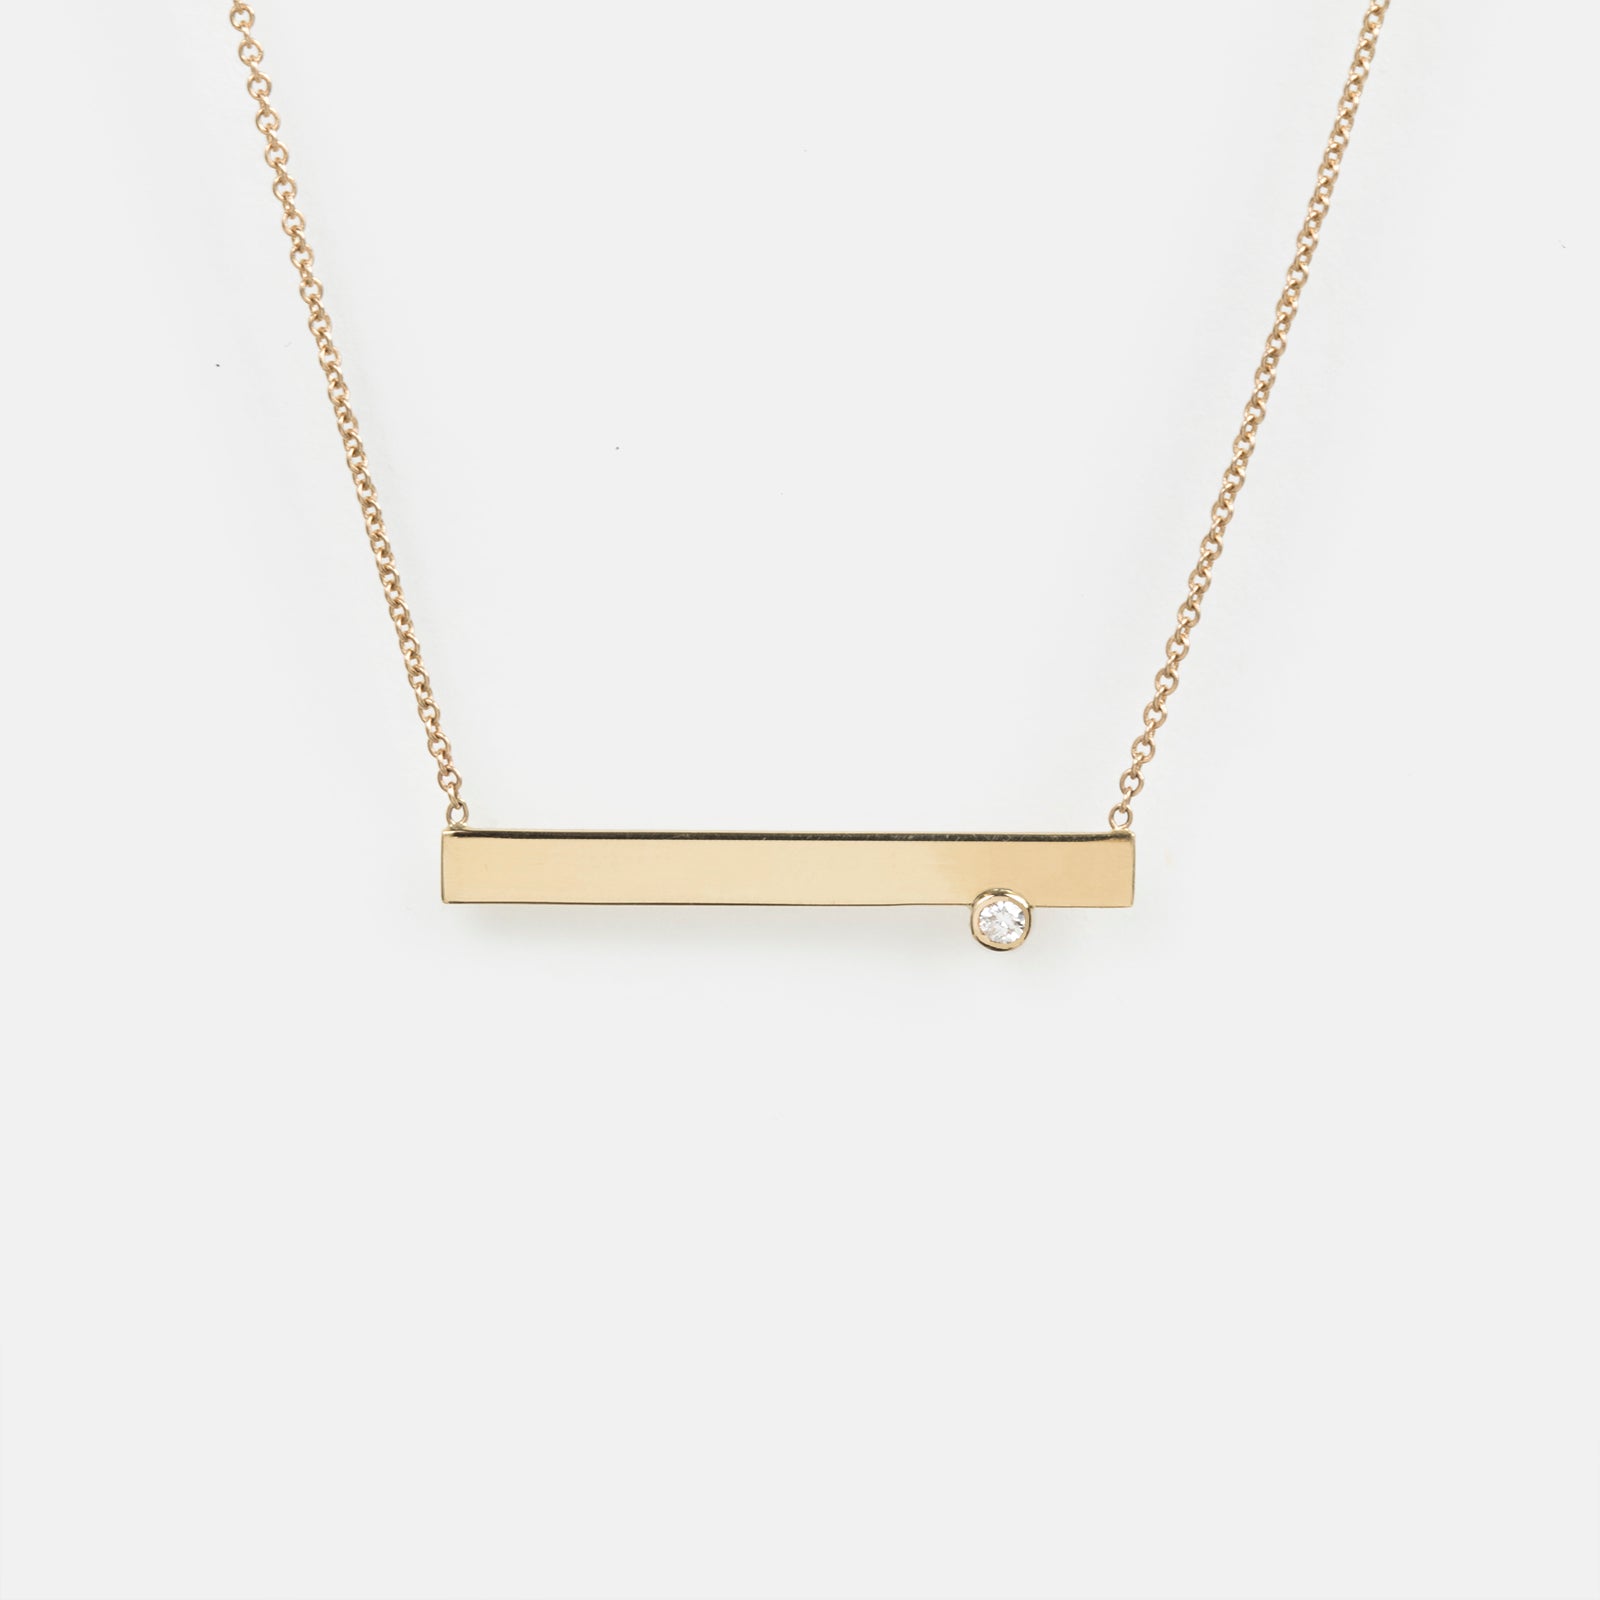 Lane Simple Necklace in 14k Gold set with White Diamond By SHW Fine Jewelry NYC